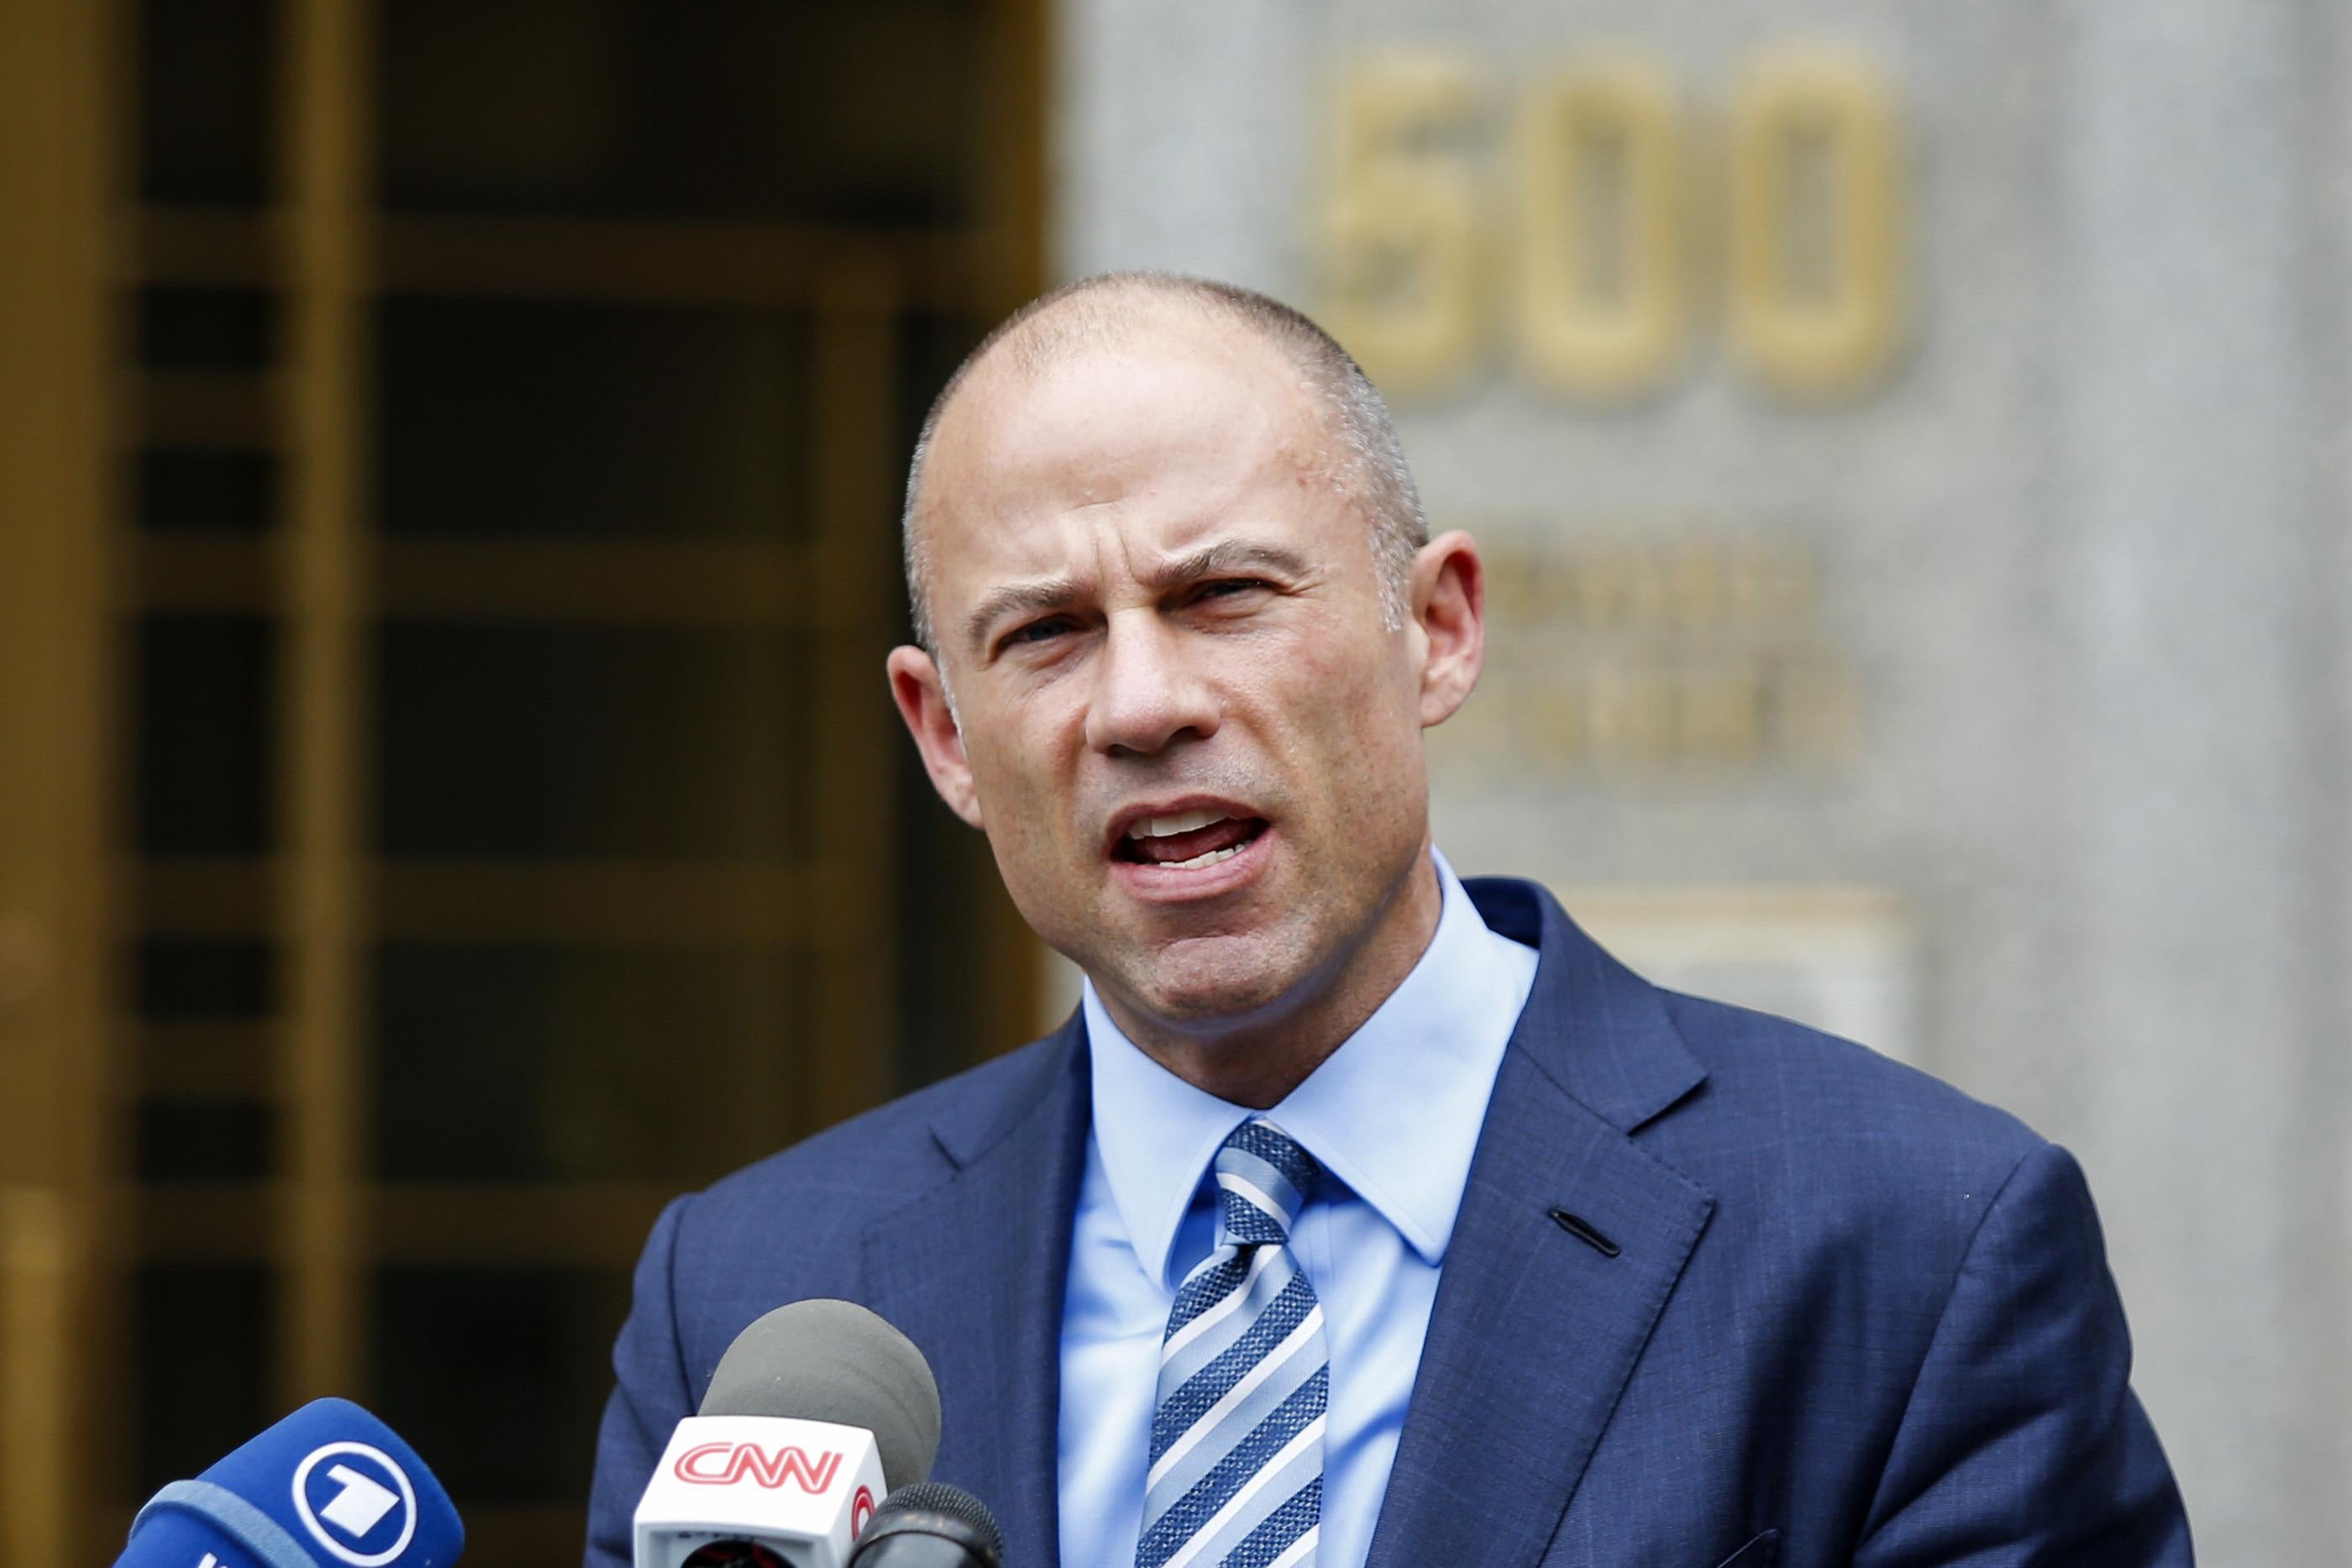 Michael Avenatti speaks to media as he exits a federal courthouse in New York City.